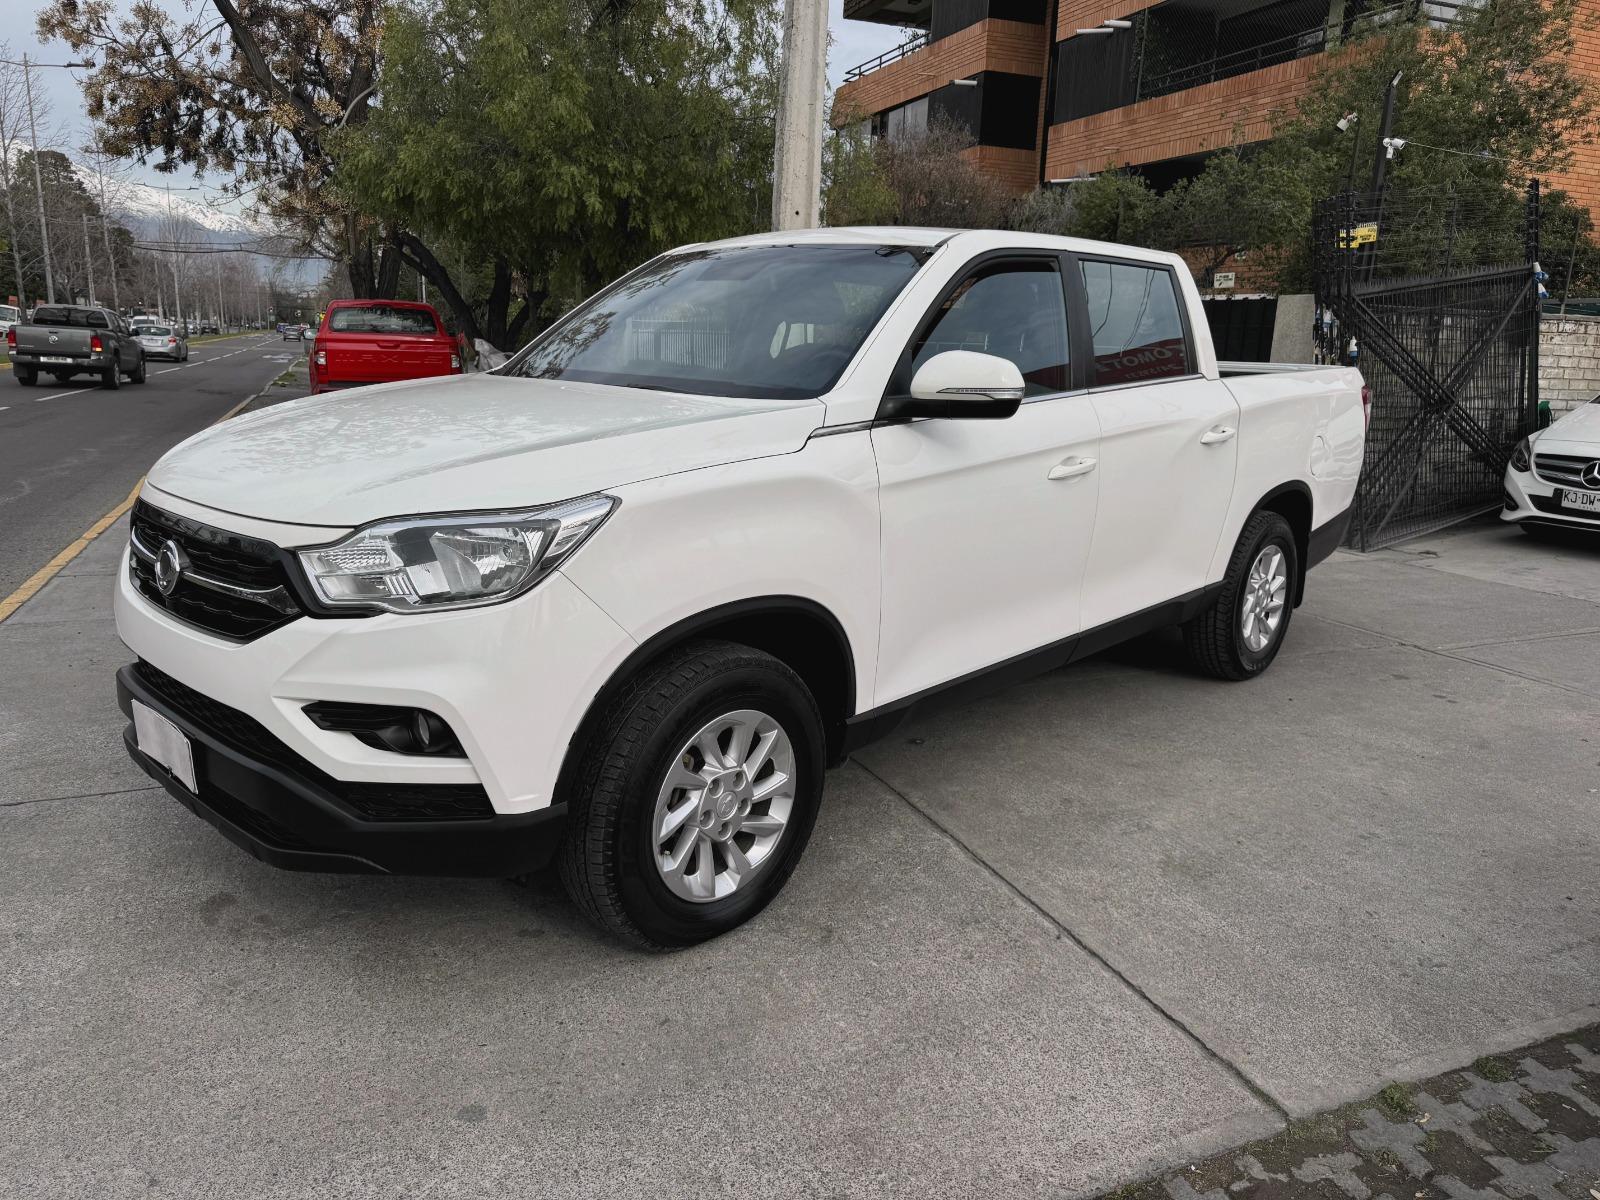 SSANGYONG MUSSO GLX 2.2 AUTOMATICA 2021 FULL AIRE AIRBAG ABS - AUTOS LOS DOMINICOS